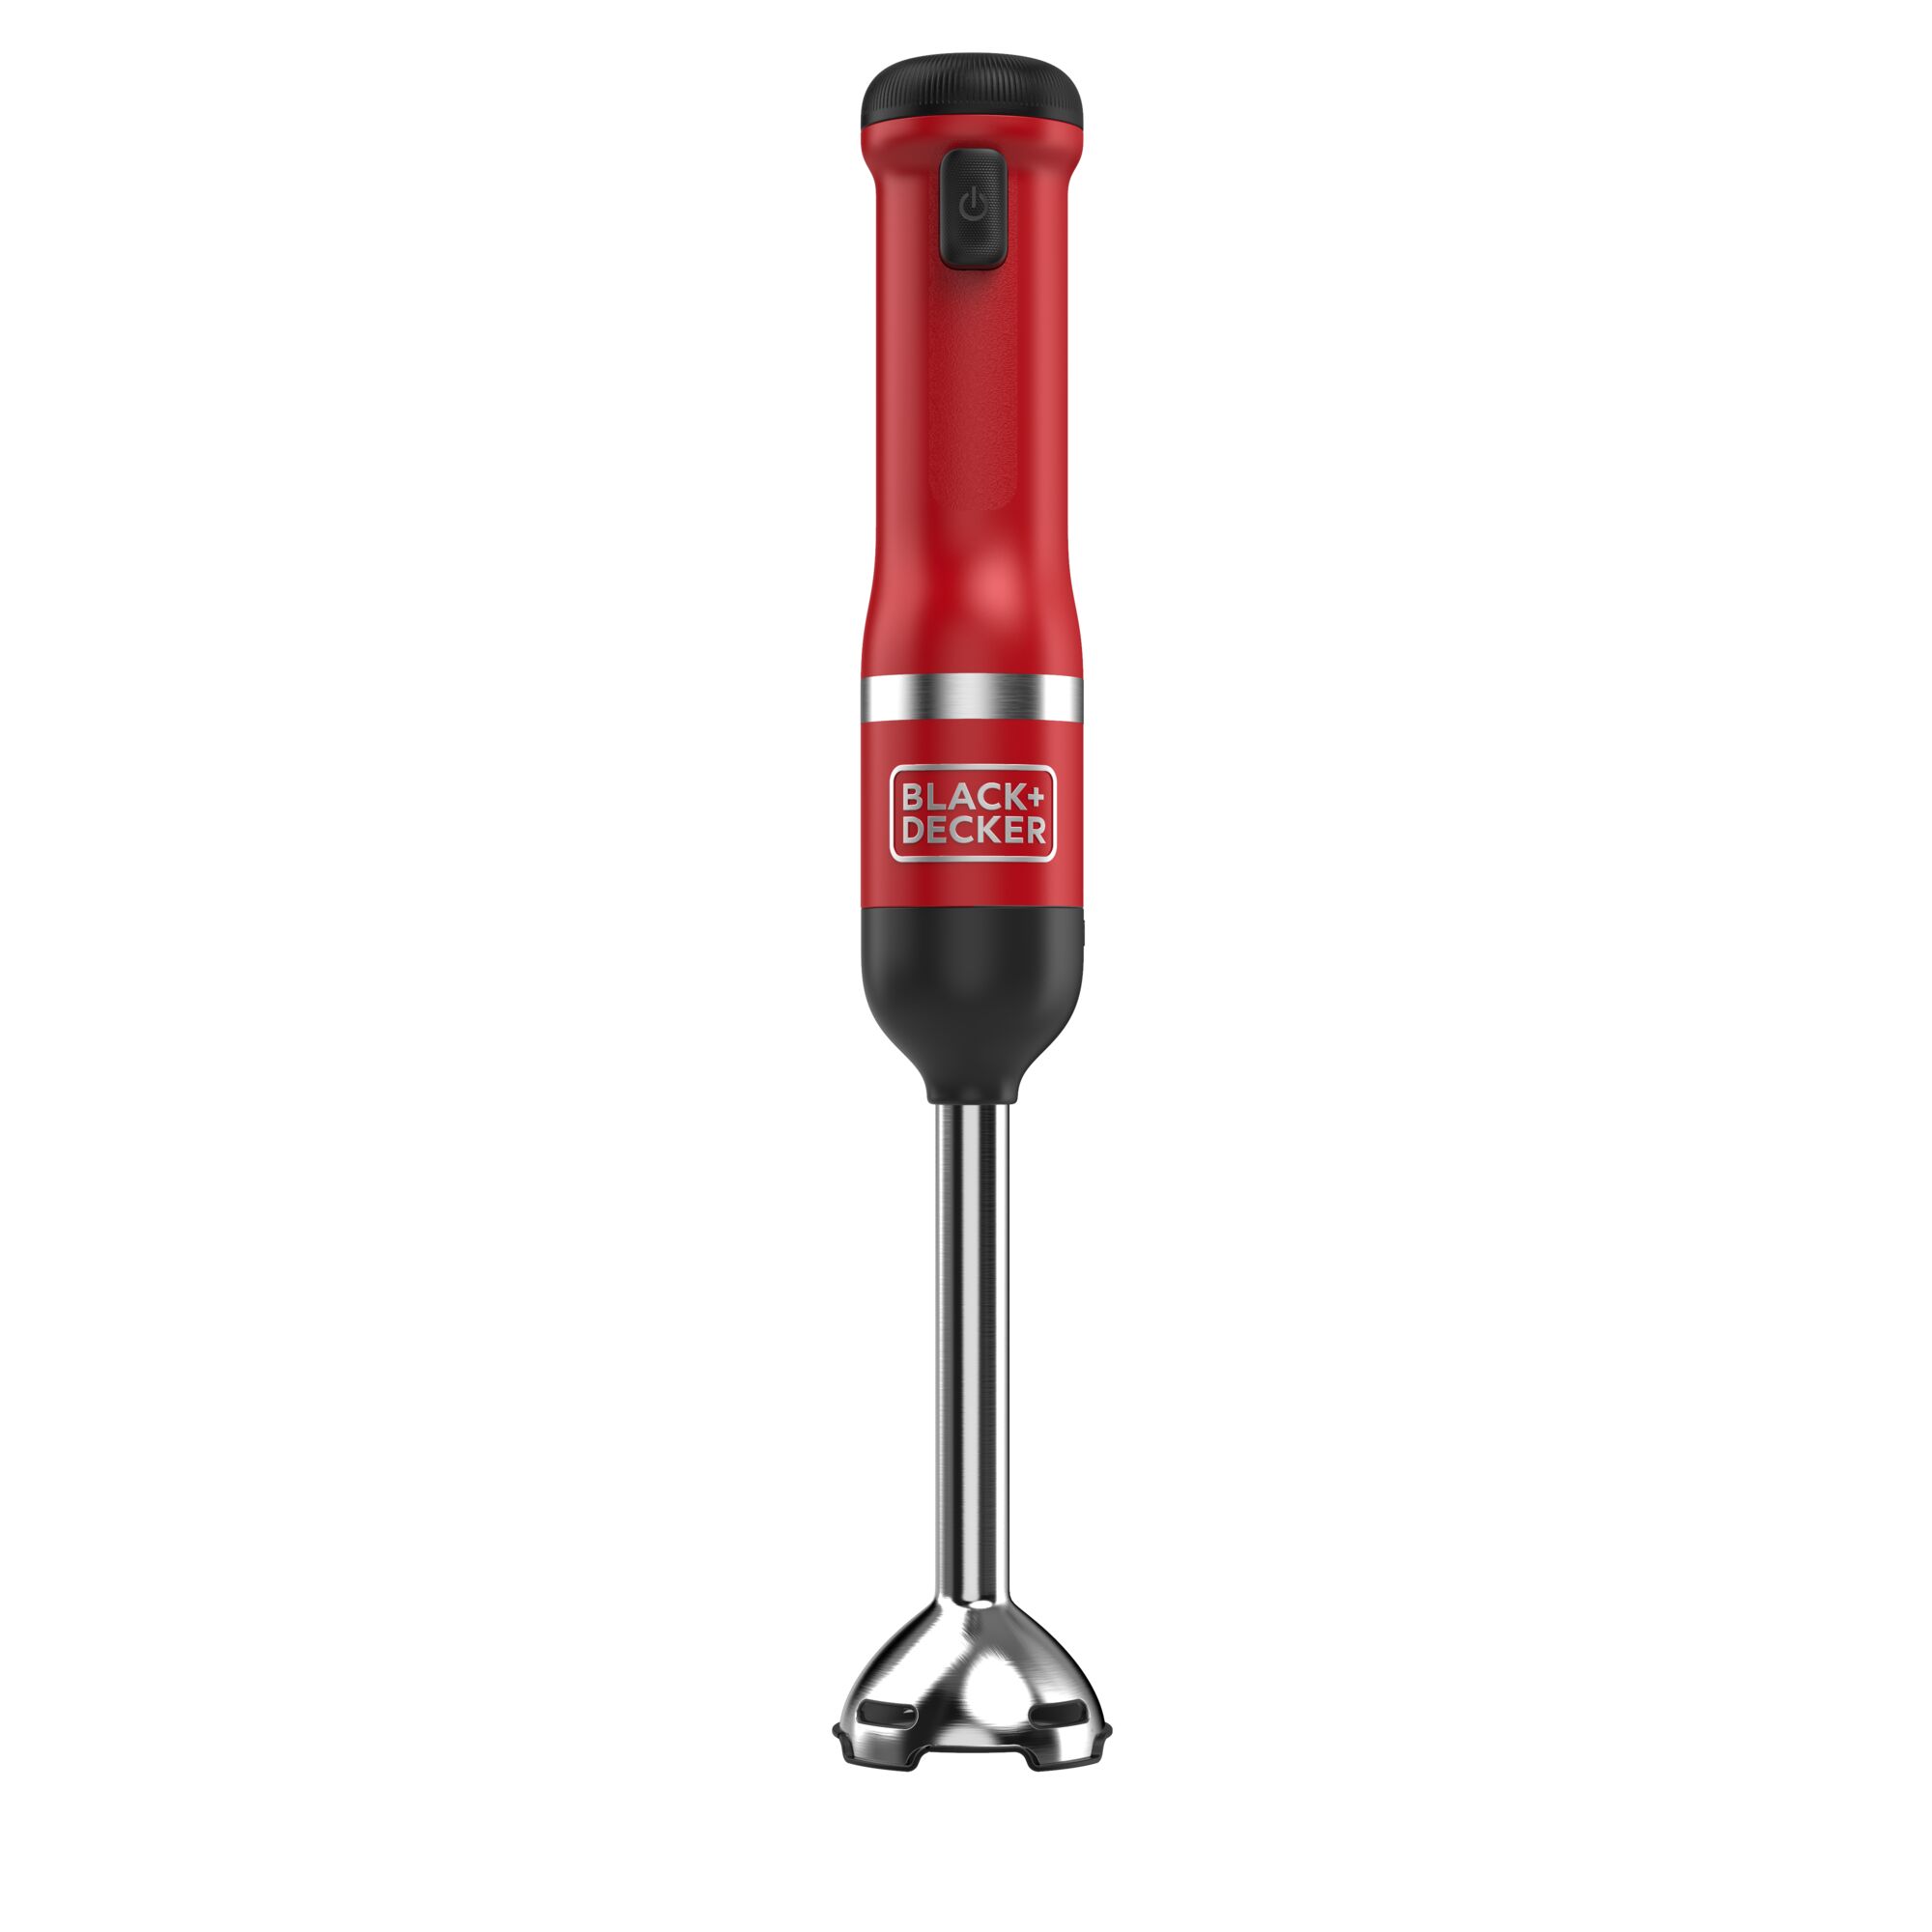 Profile front view of the BLACK+DECKER kitchen wand immersion blender attachment attached to the red wand base